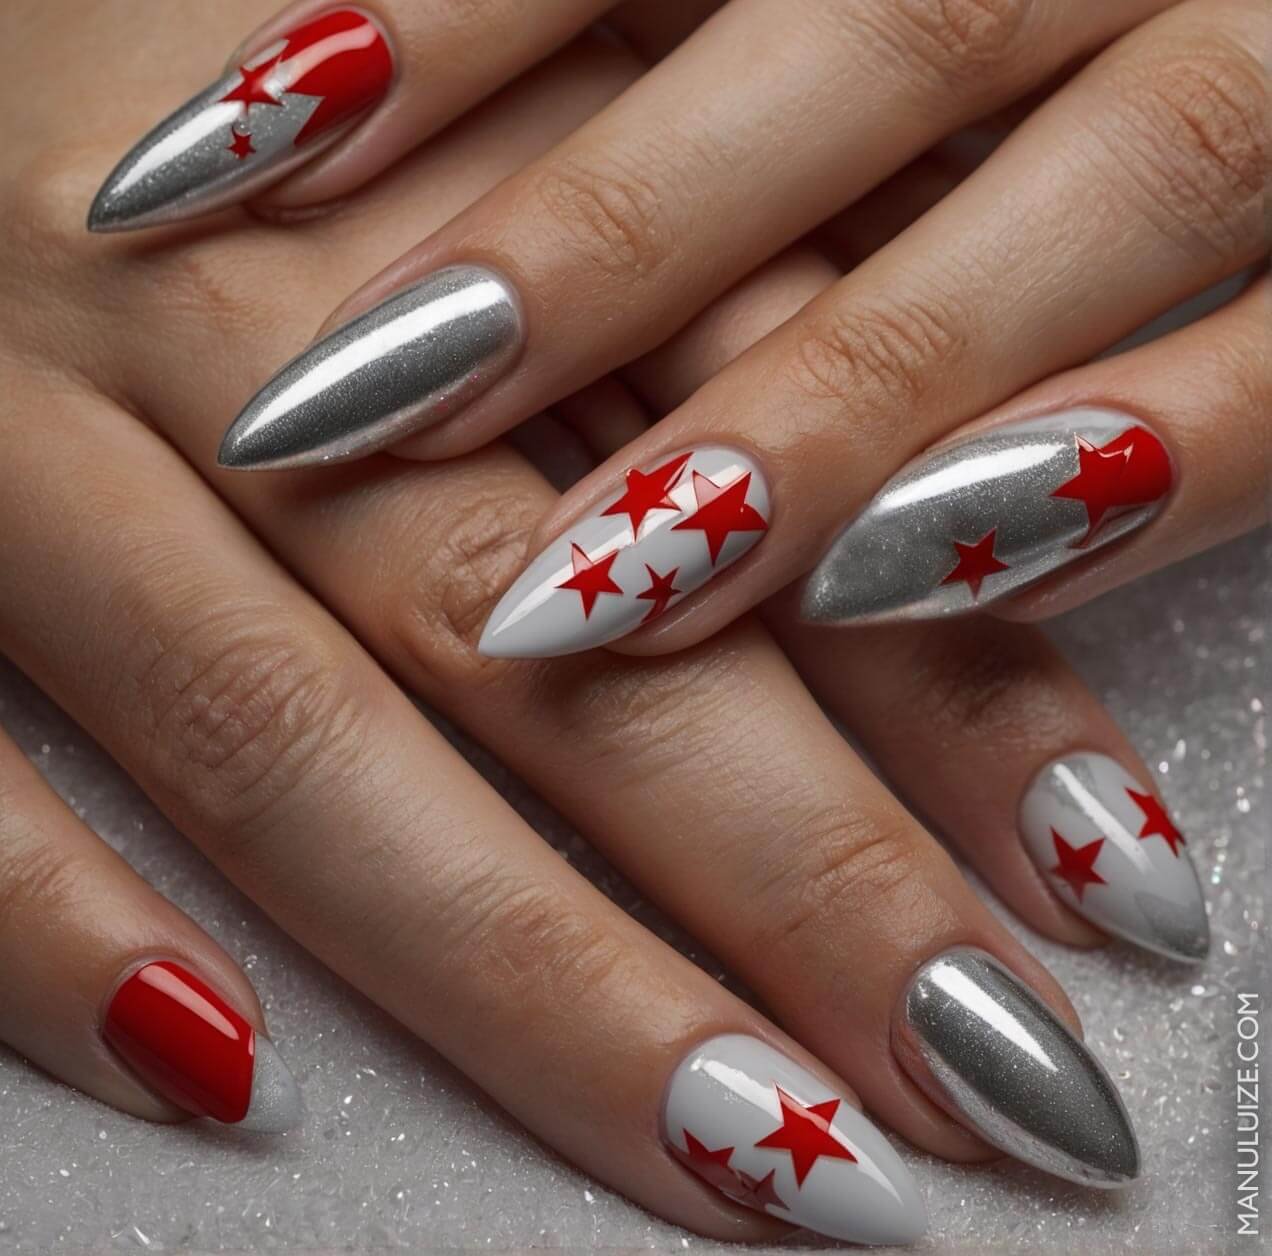 Red stars nails